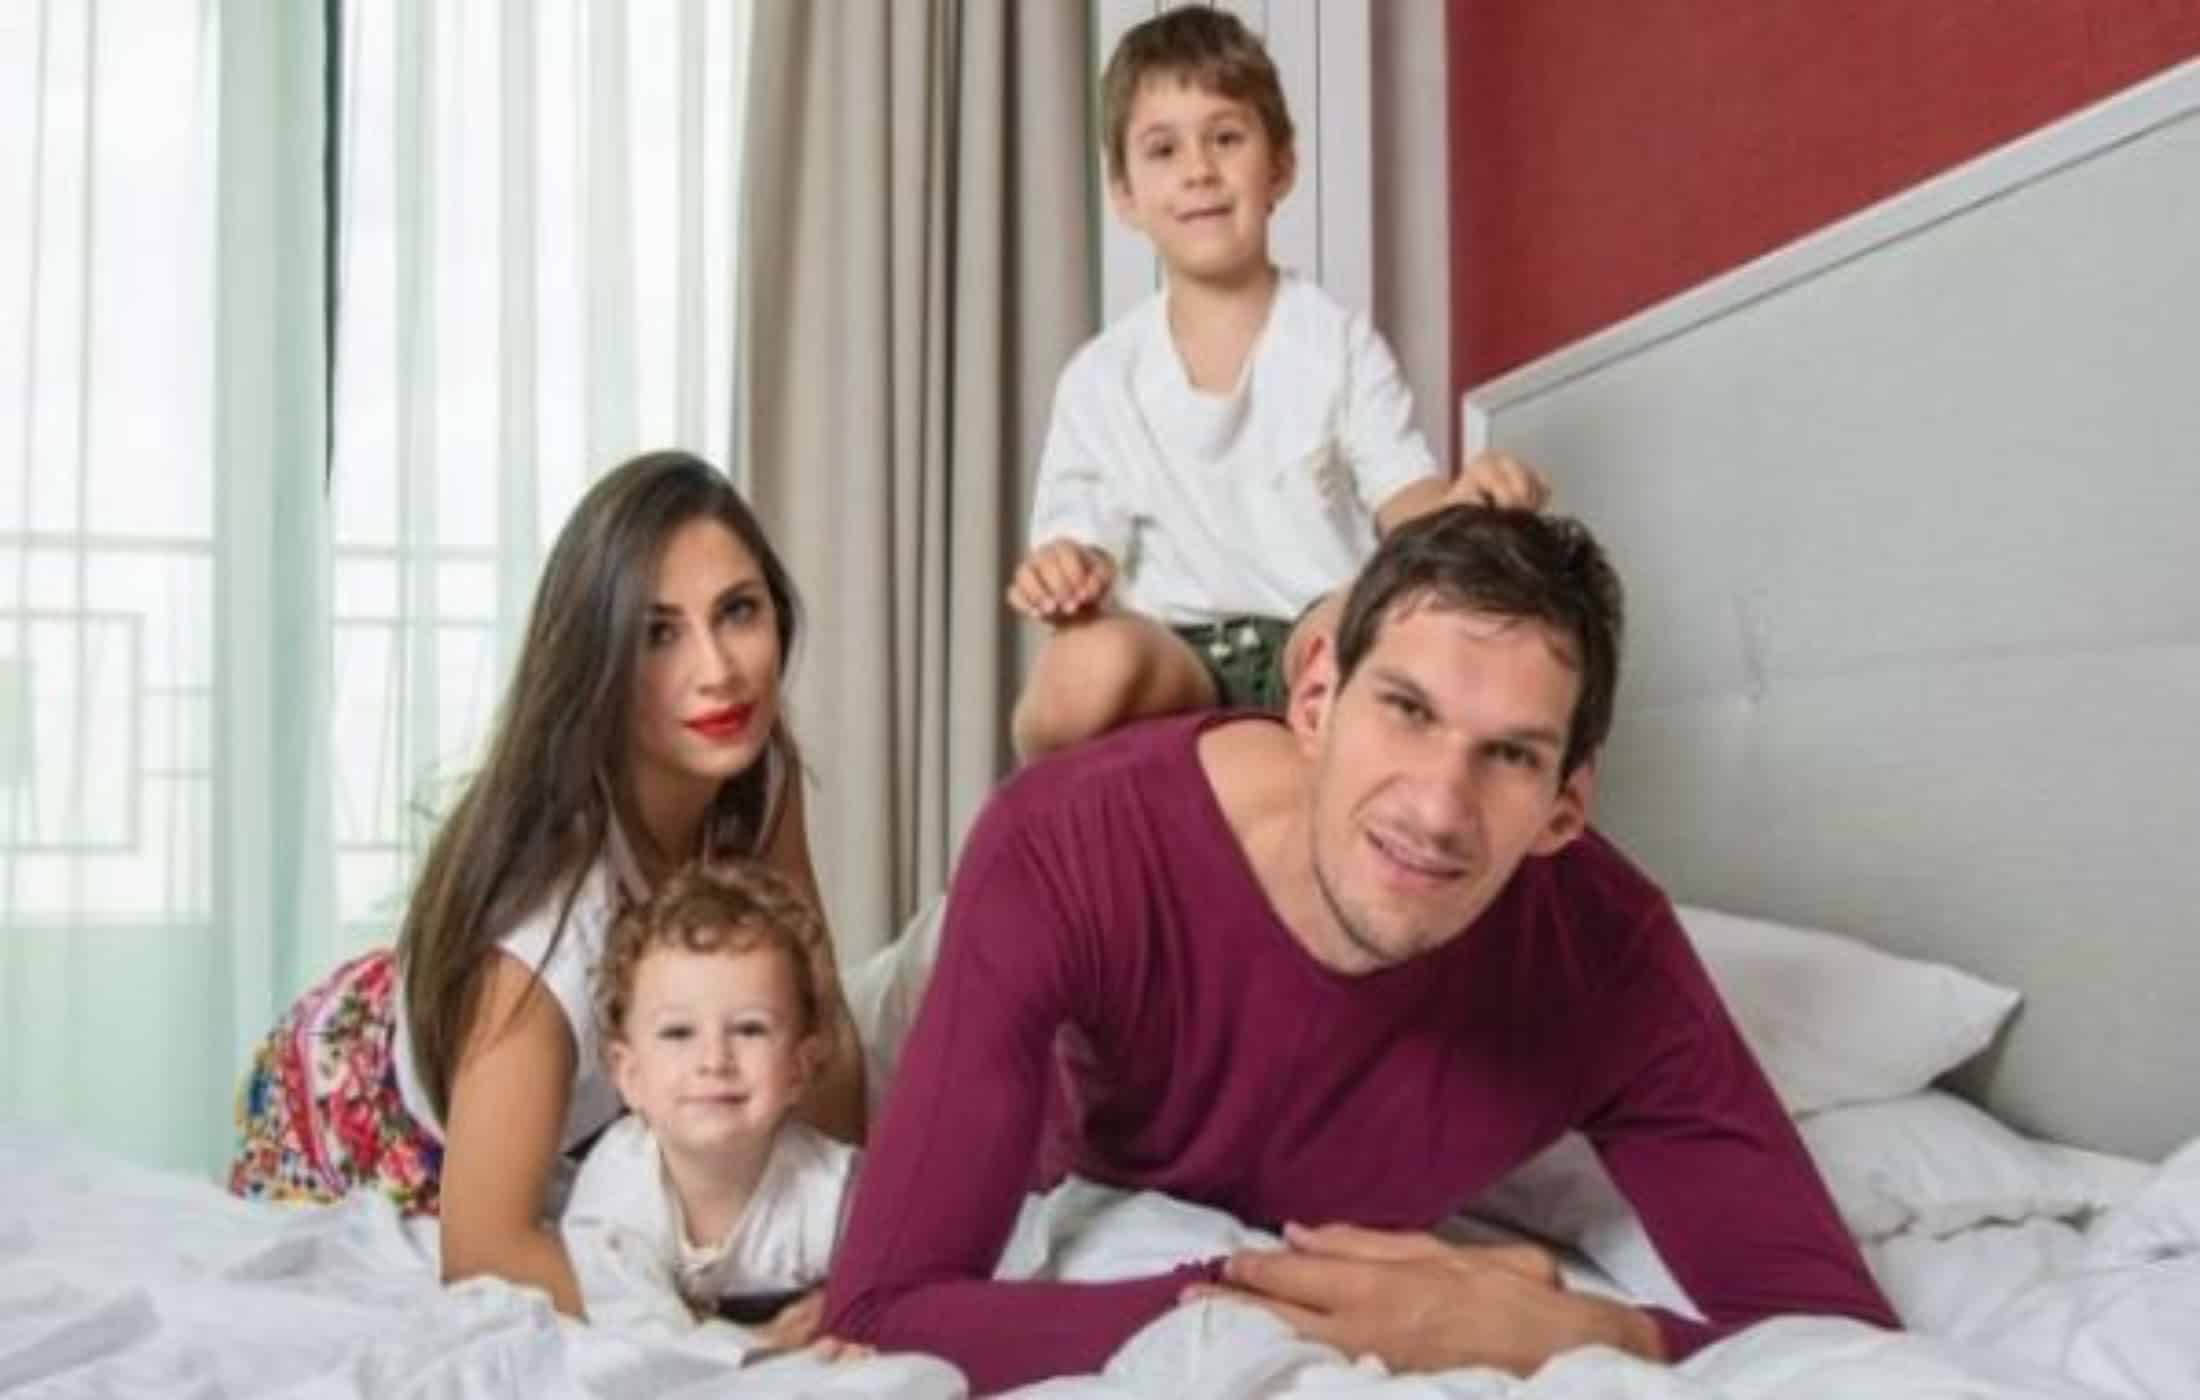 Boban Marjanovic Wiki, Biography, Age, Height, Family, Wife, Salary &  Images